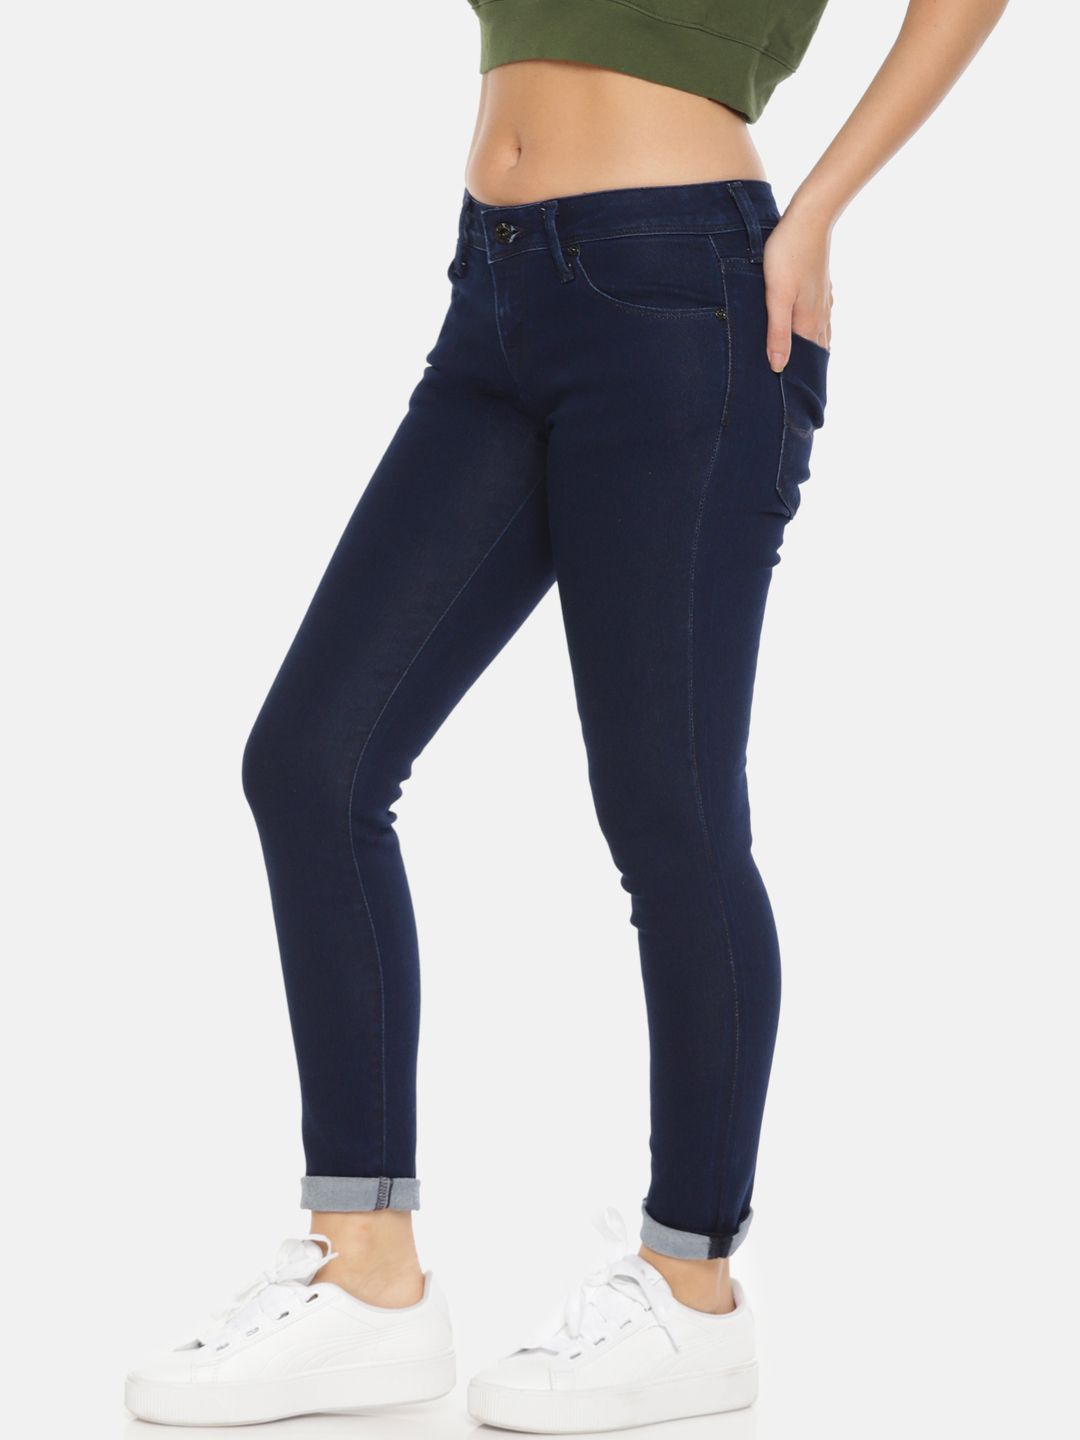 Pepe Jeans Women Blue Jegging Super Skinny Fit Mid-Rise Clean Look Stretchable Jeans Price in India